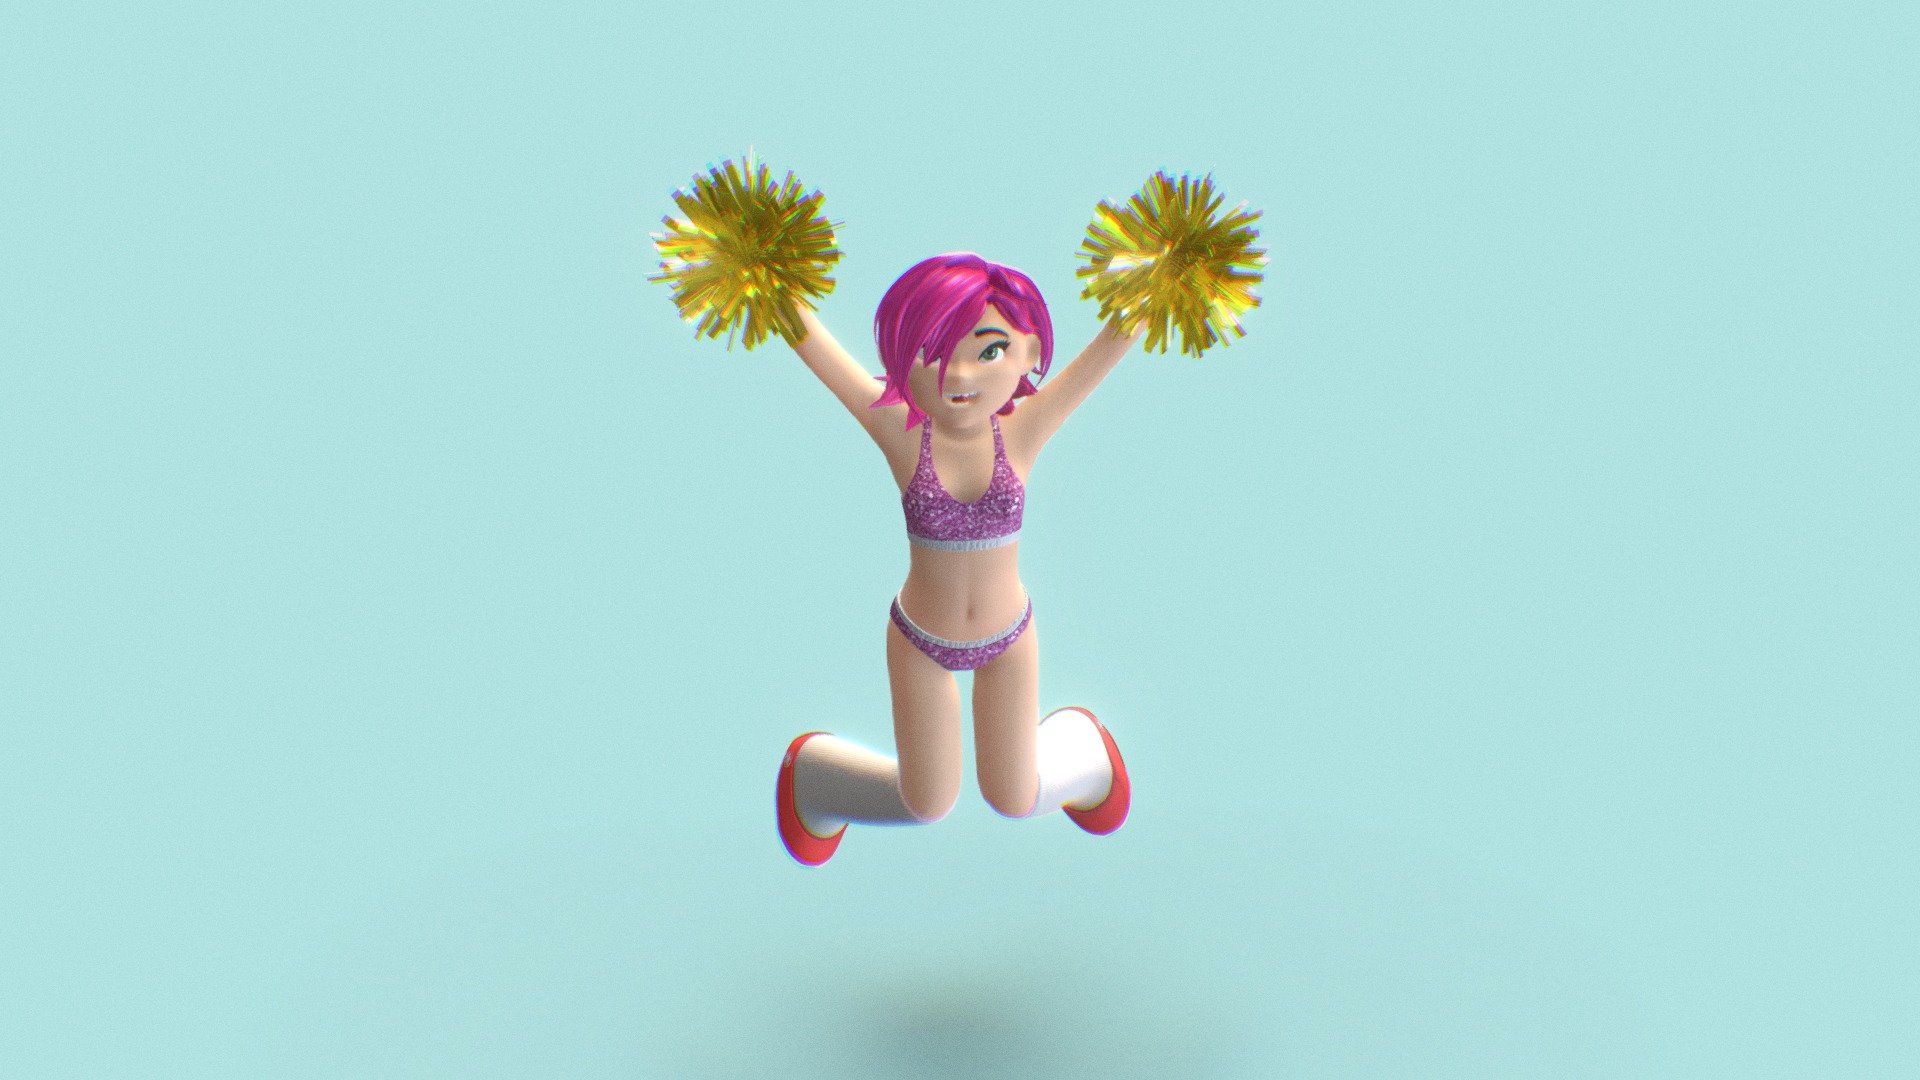 Made few years ago, when I've been learning Blender. Just add some little corrections.
The design of CheerleaderGirl made long time ago. 
You can see it here: https://pl.pinterest.com/pin/728457308483397121 - Cheerleader Girl - Download Free 3D model by GregoryEm (@g.matwiejszyn) 3d model